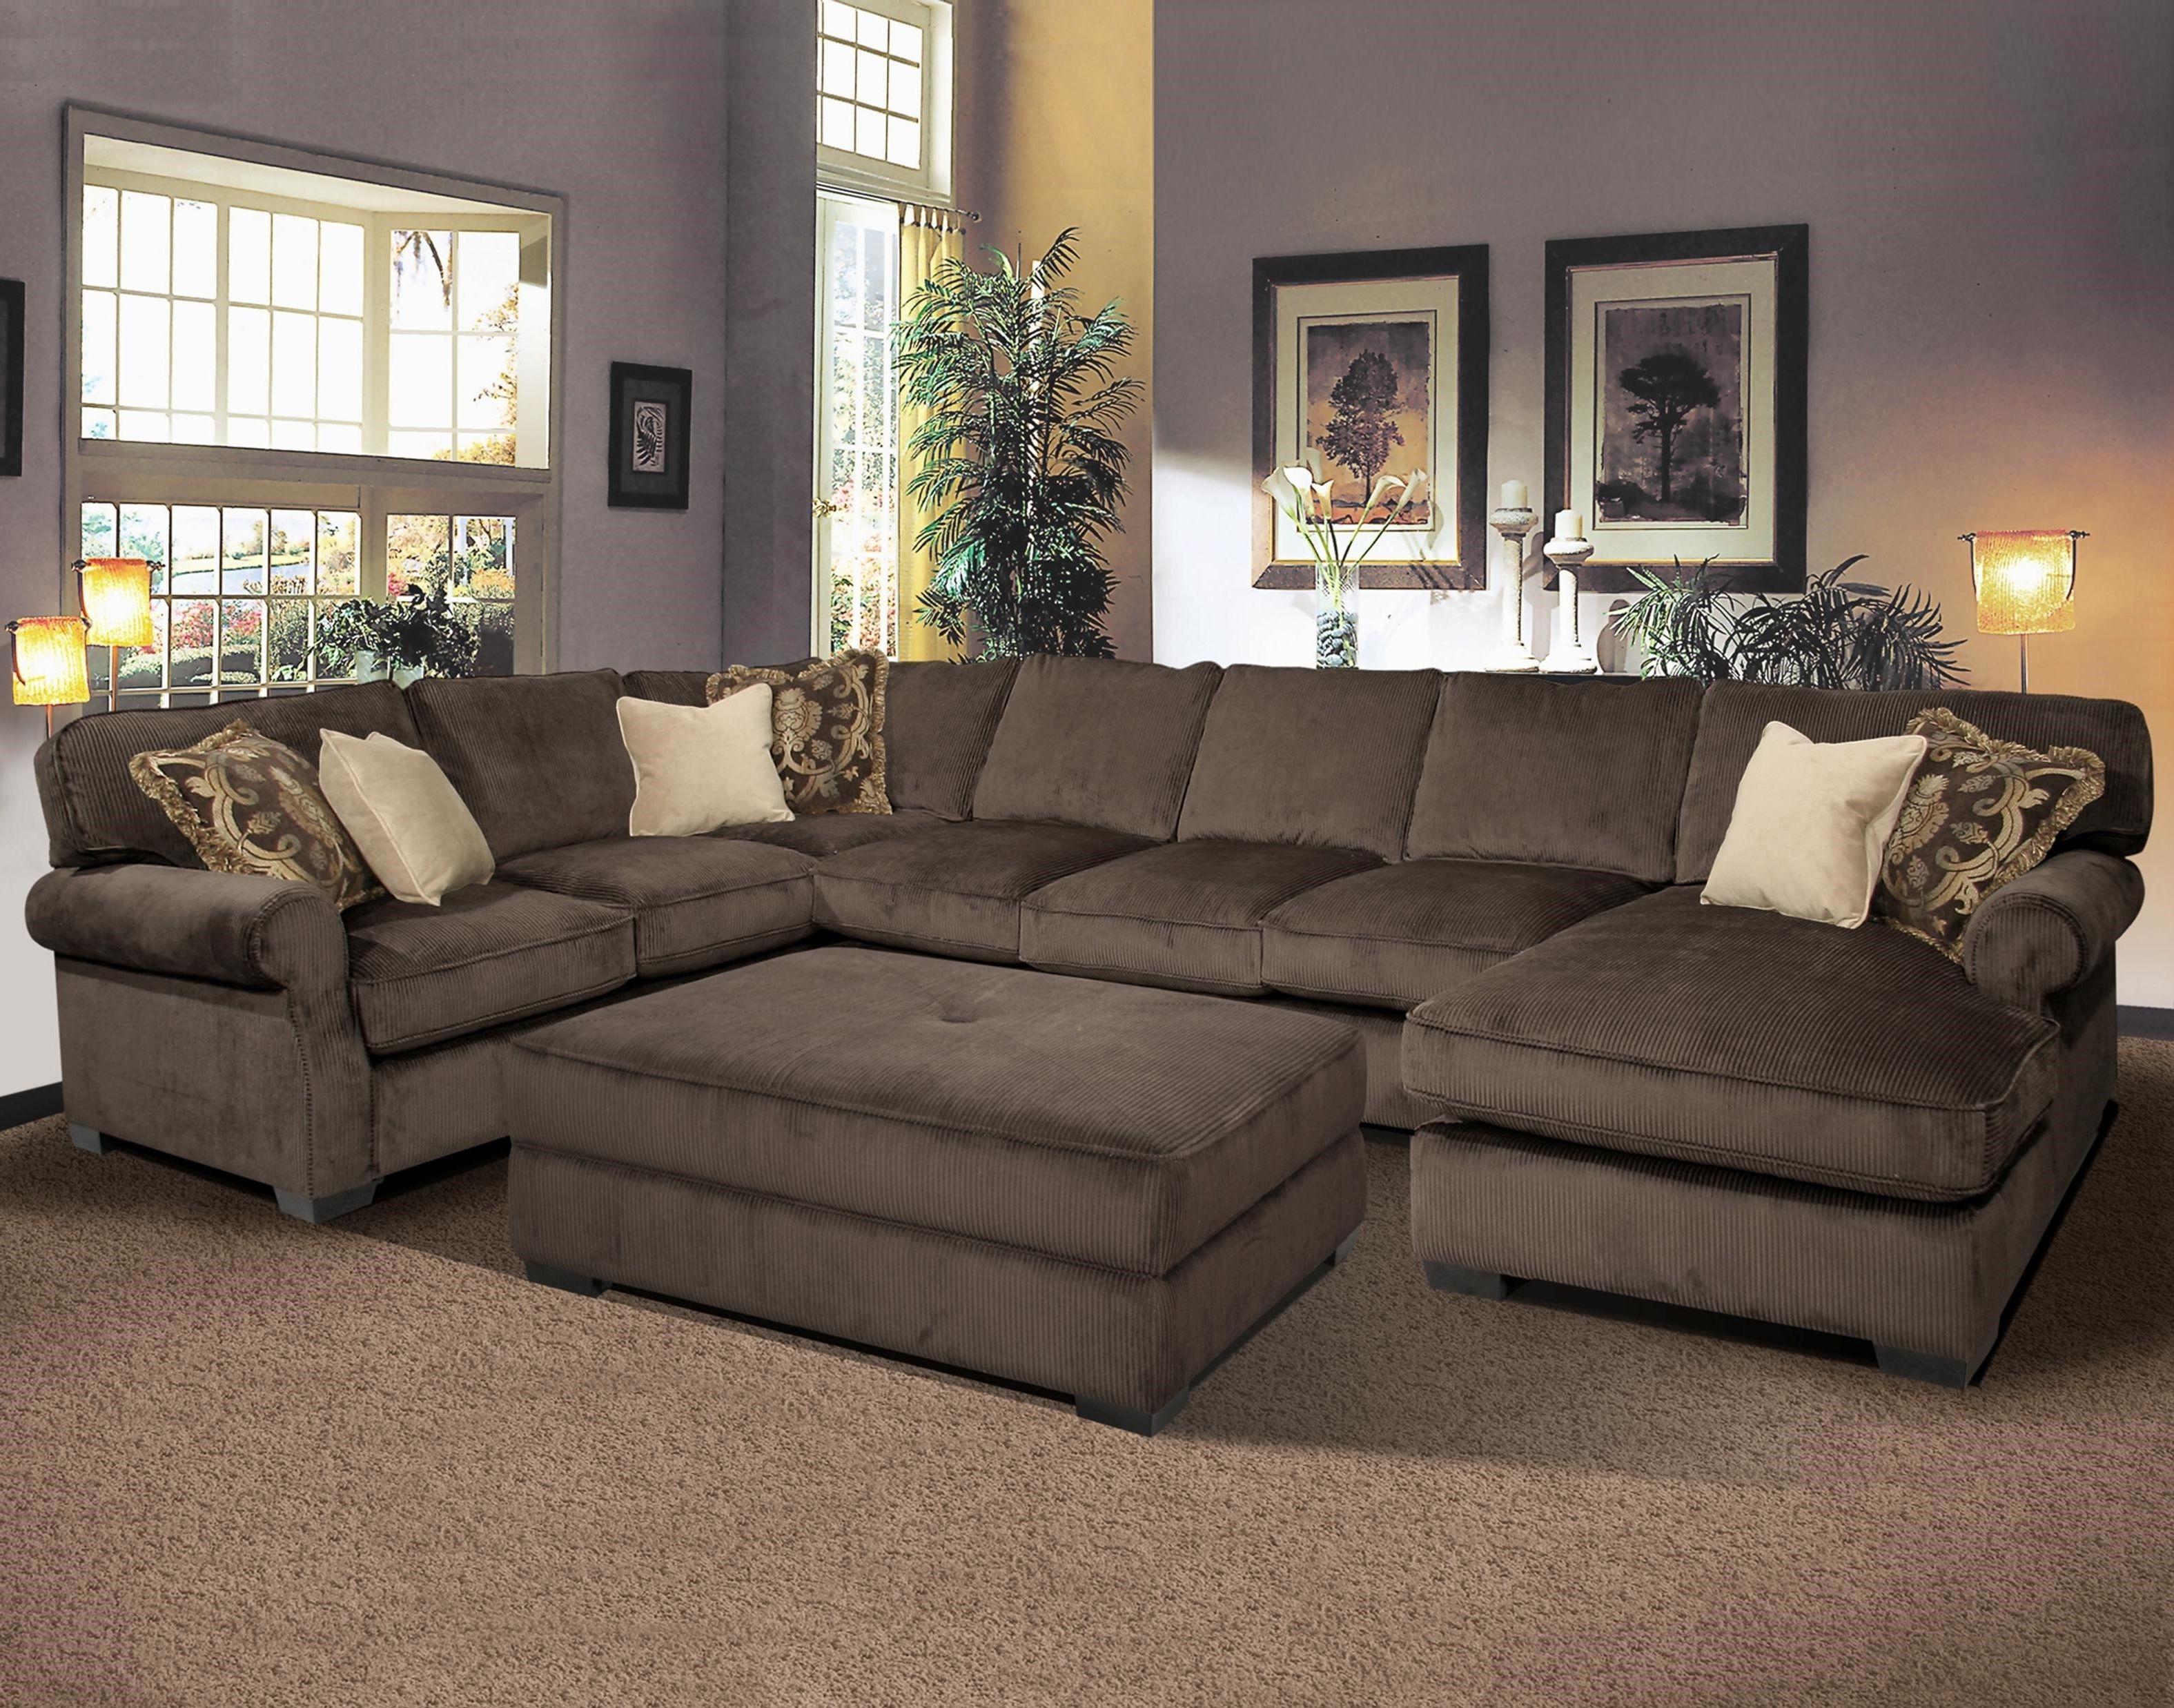 Featured Photo of 15 Photos Victoria Bc Sectional Sofas